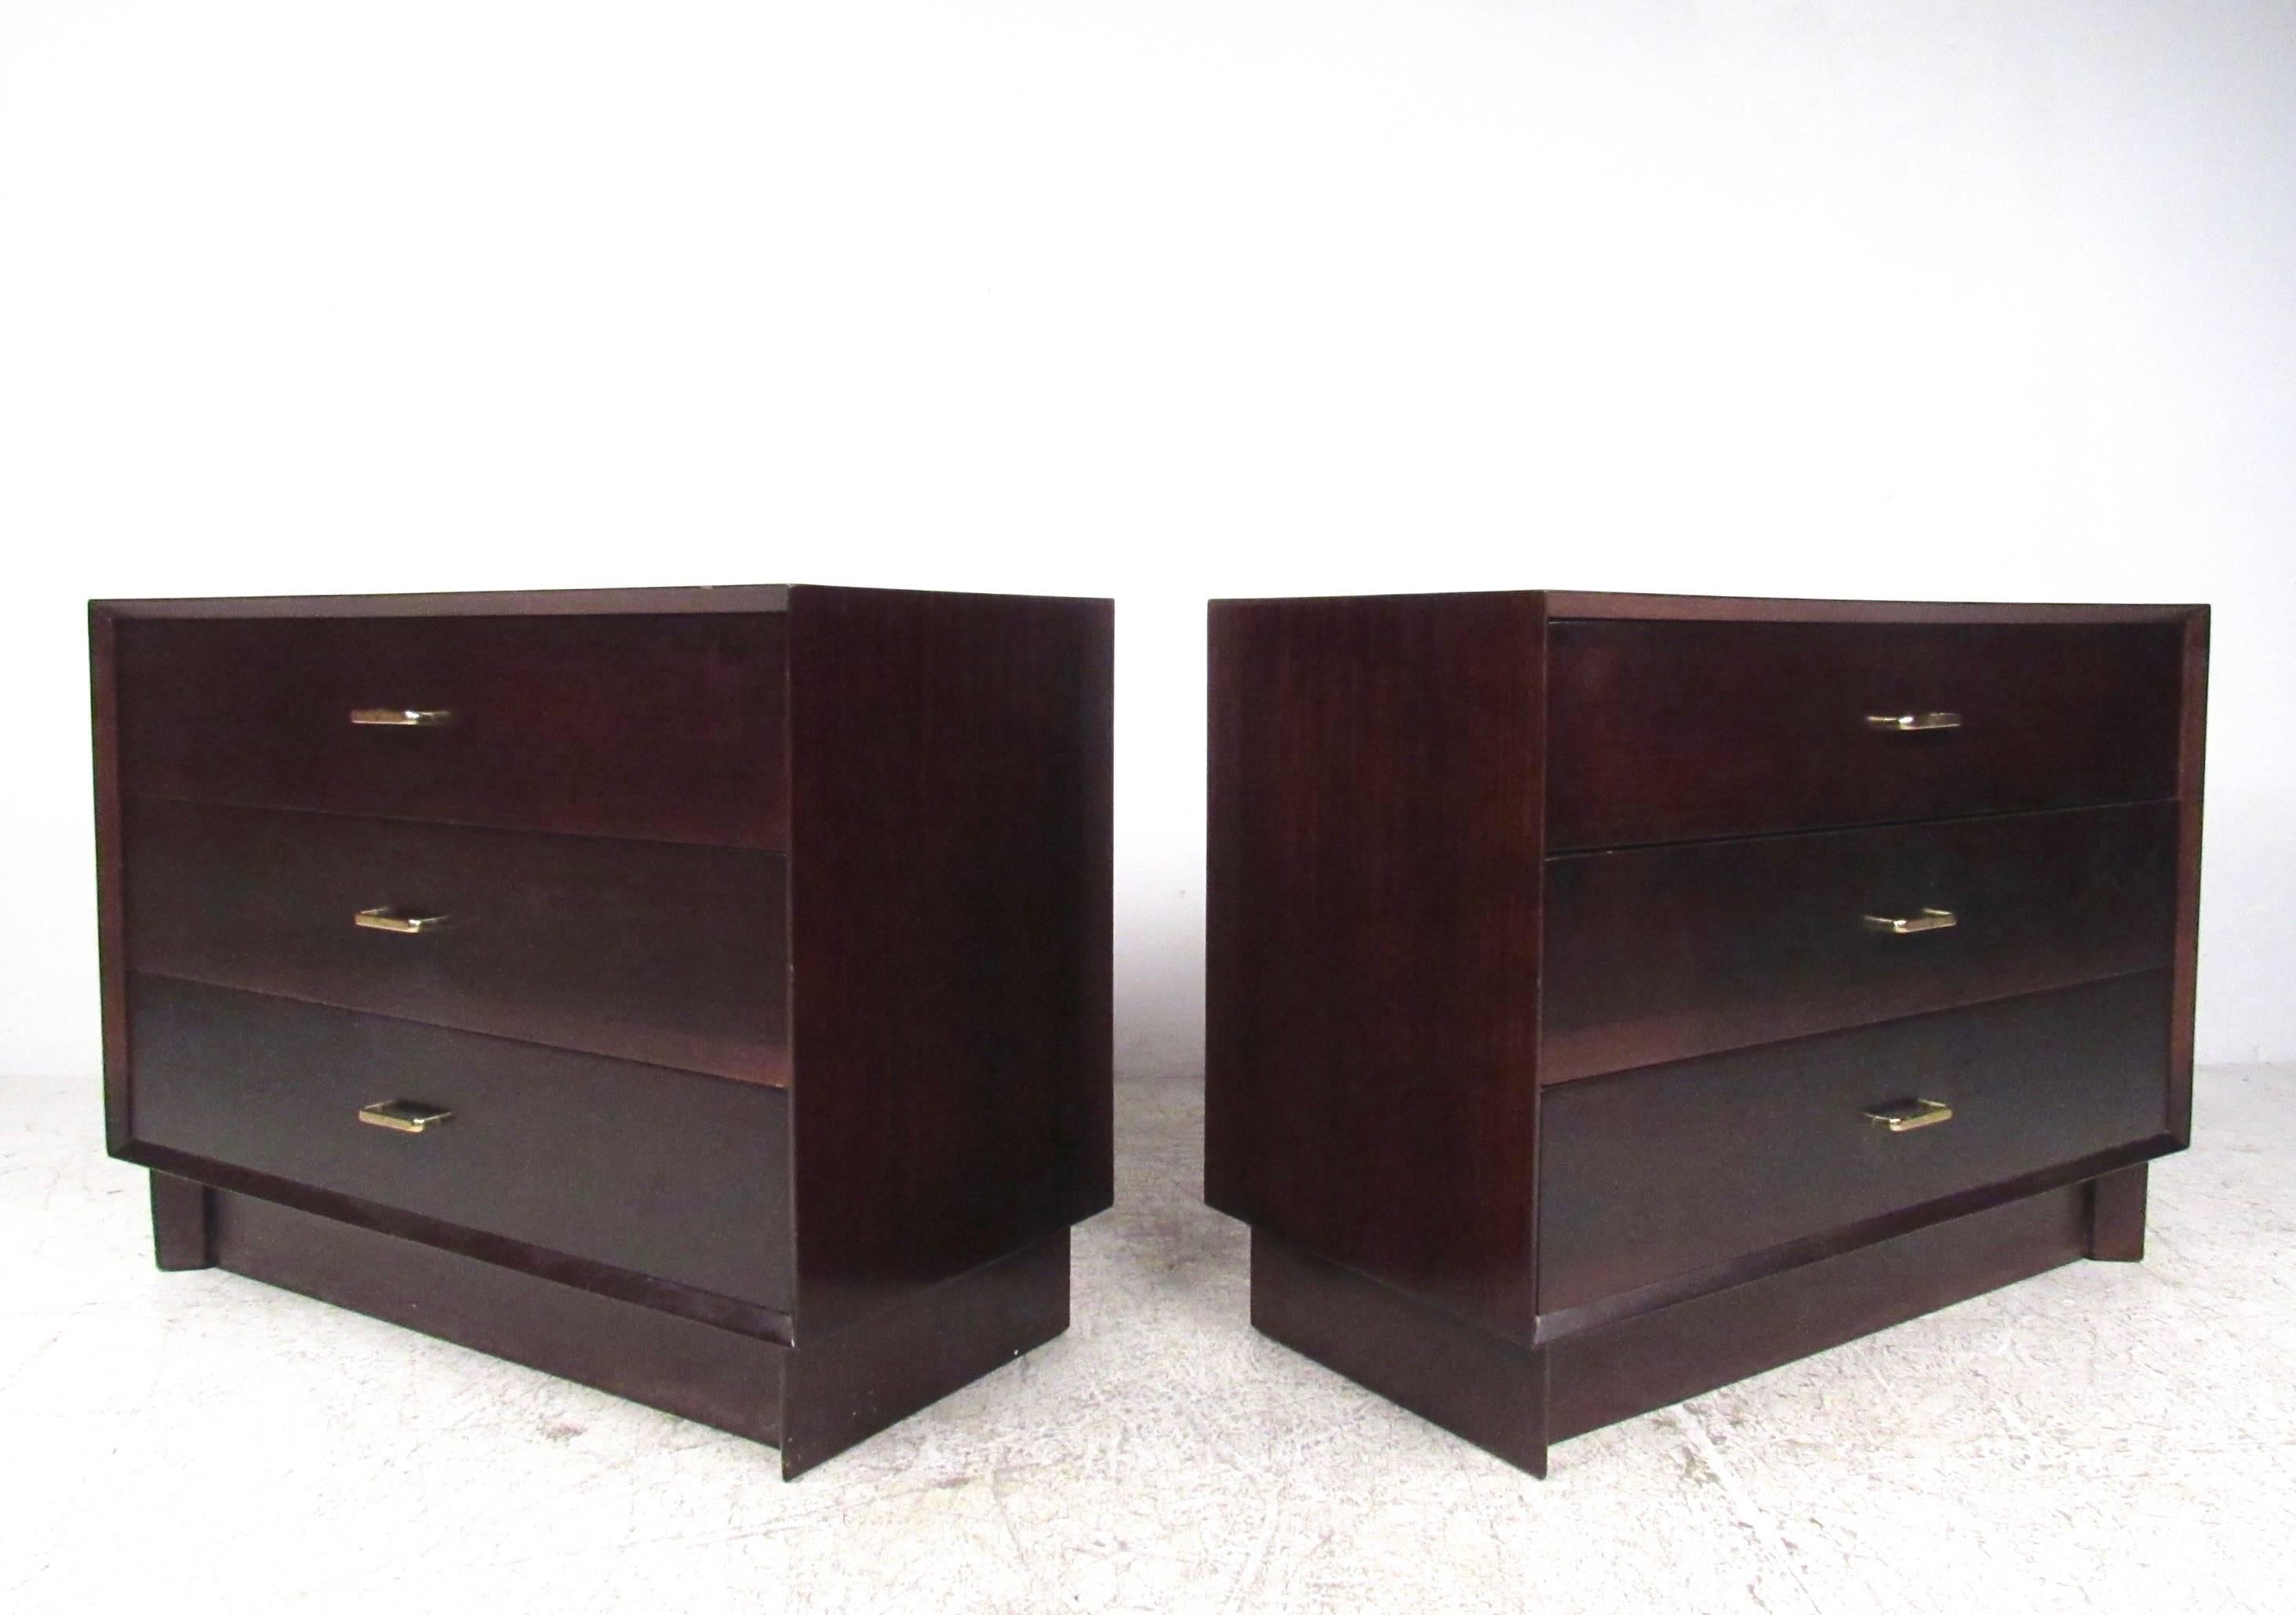 This unique pair of vintage modern bachelor's chests features mahogany construction with textured brass finish drawer pulls. Perfect matching pair for use as oversized bedside tables or storage dressers in any setting. Please confirm item location